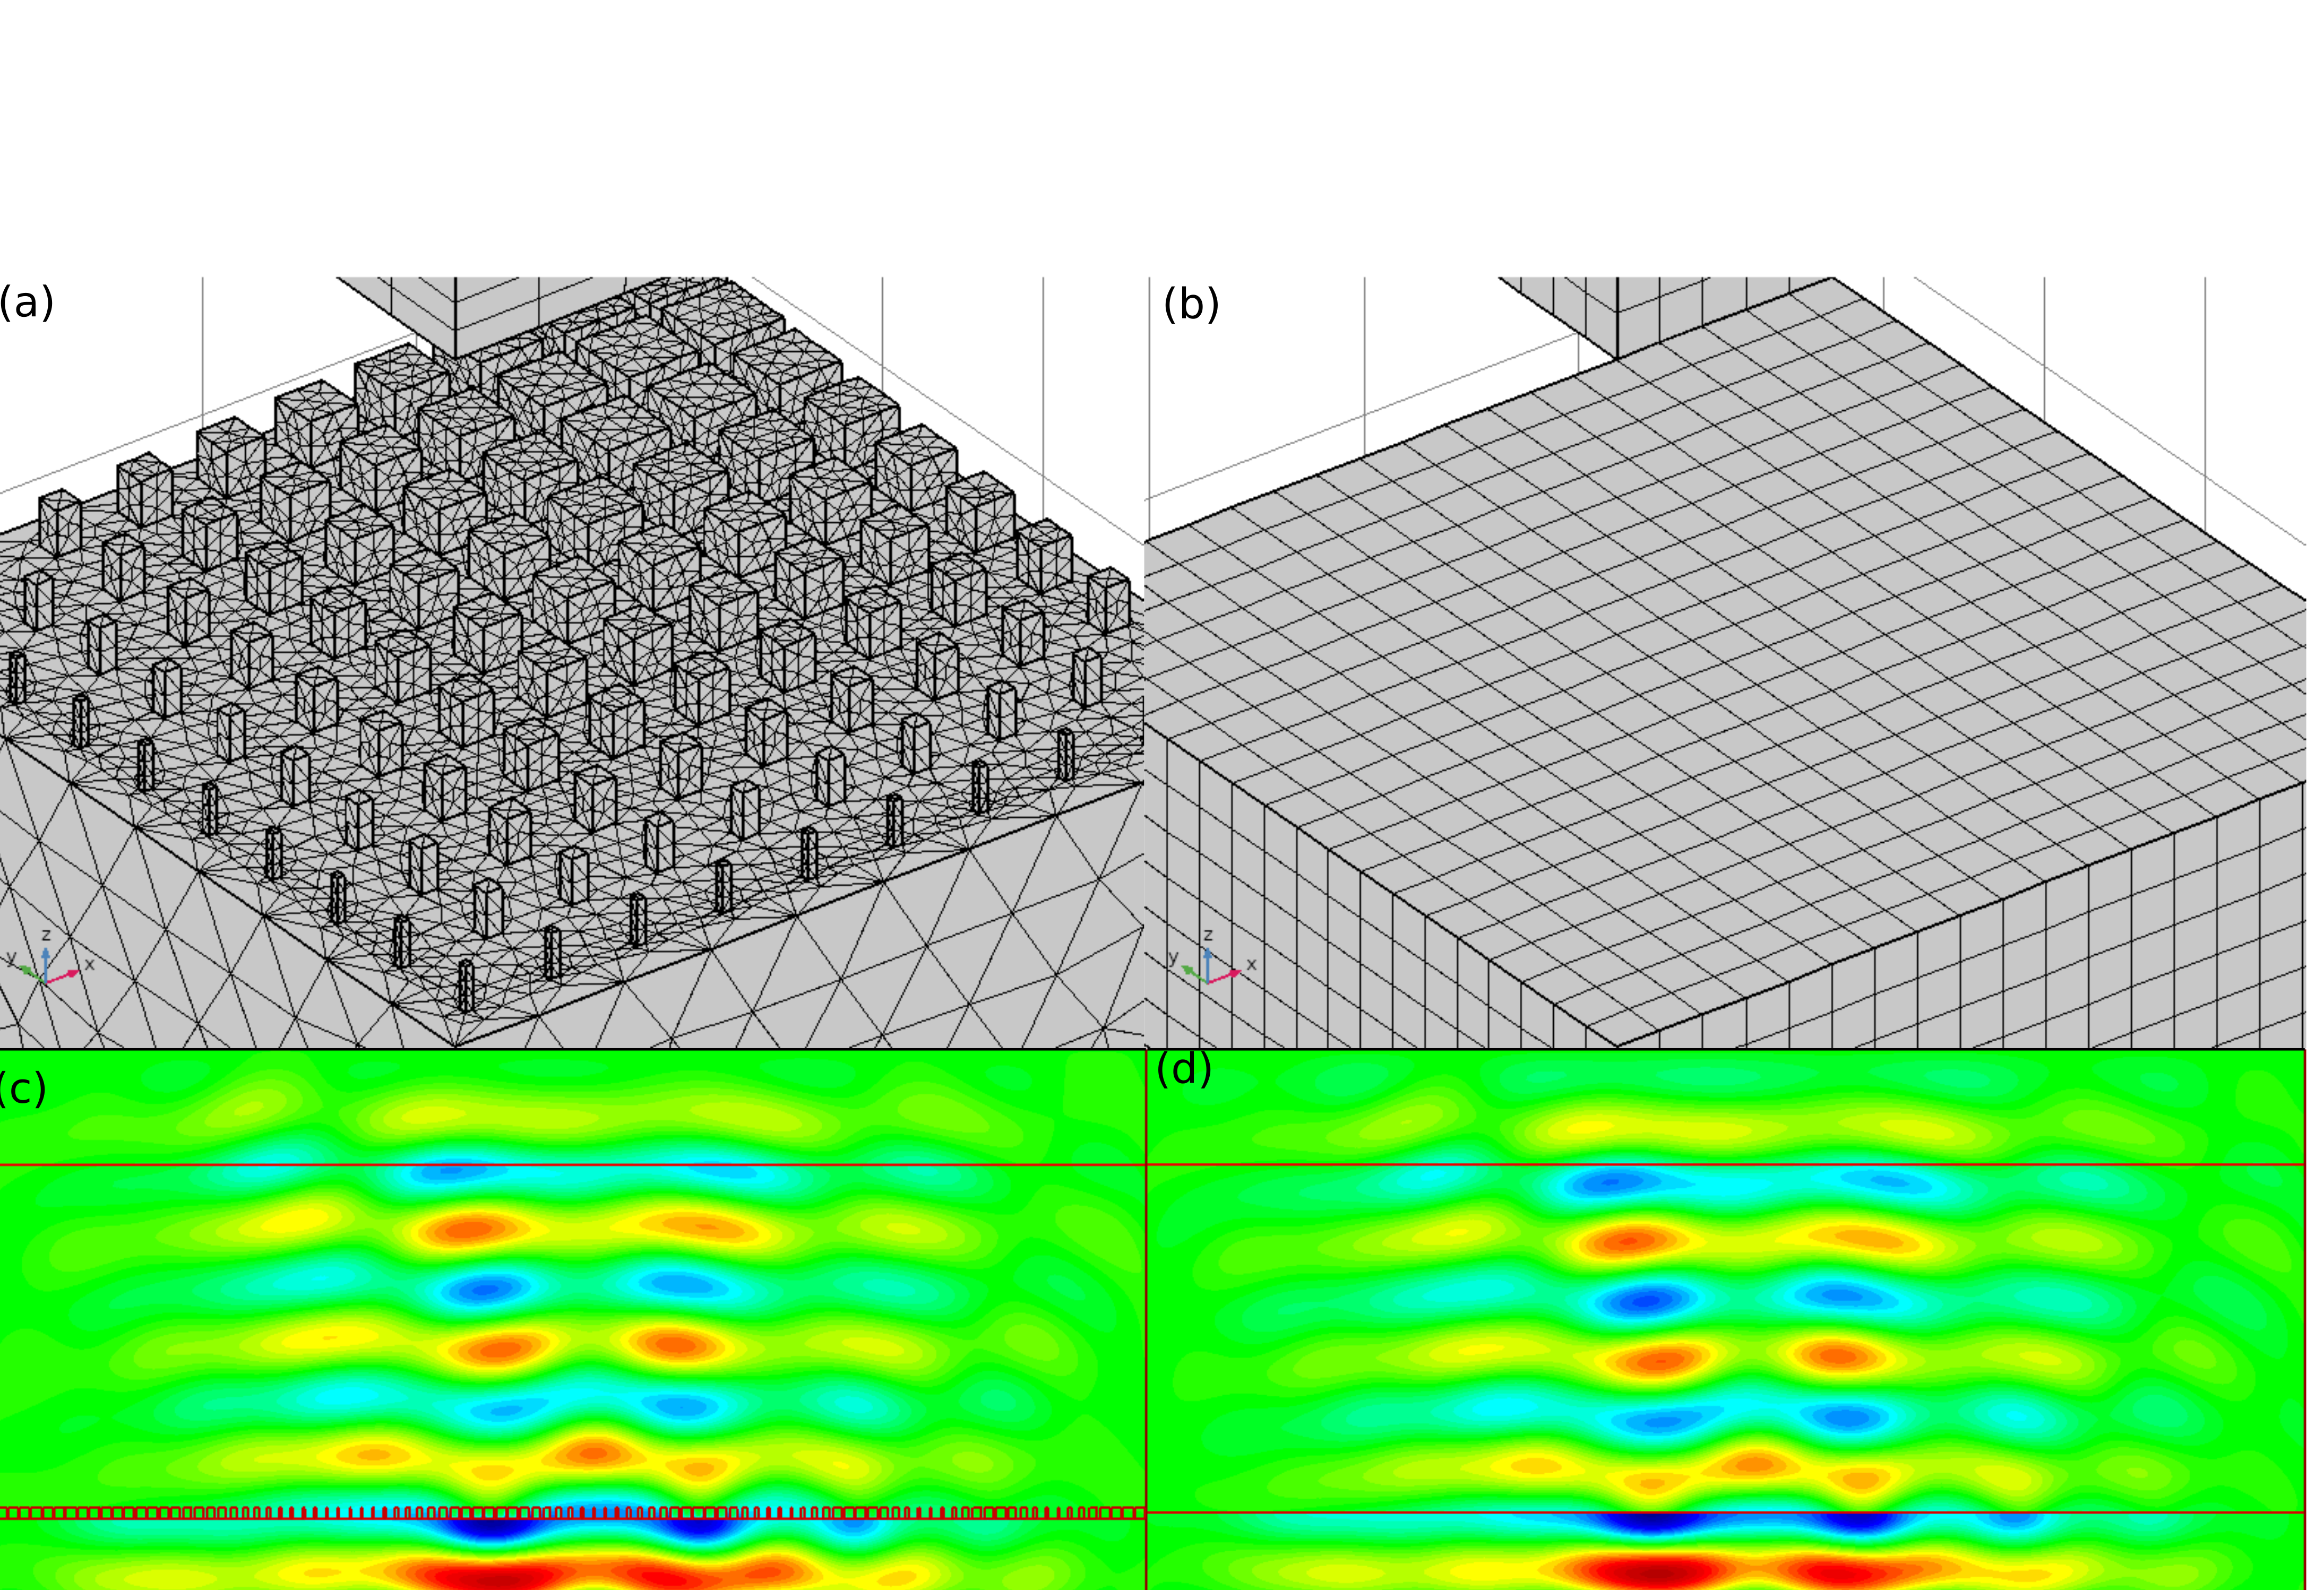 (a) Mesh with a microstructure. (b) Cartesian mesh used for
the simulation with the GSTCs. (c) reference solution computed on a
nanostructured mesh. (d) Simulation with homogeneization-based
equivalent boundary conditions.